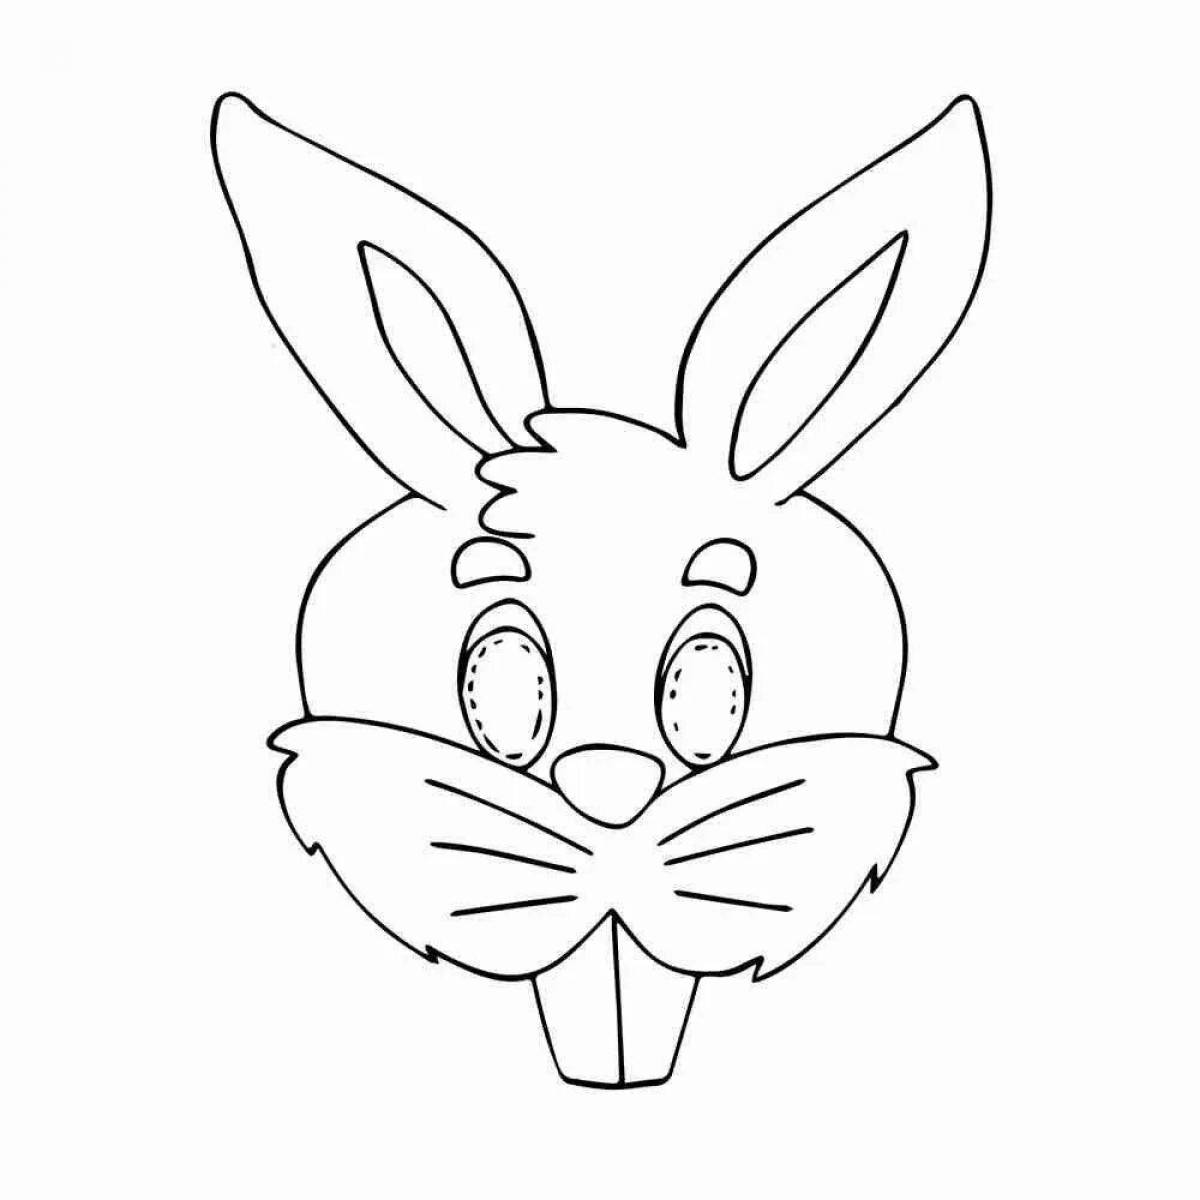 Coloring book shining head of a hare